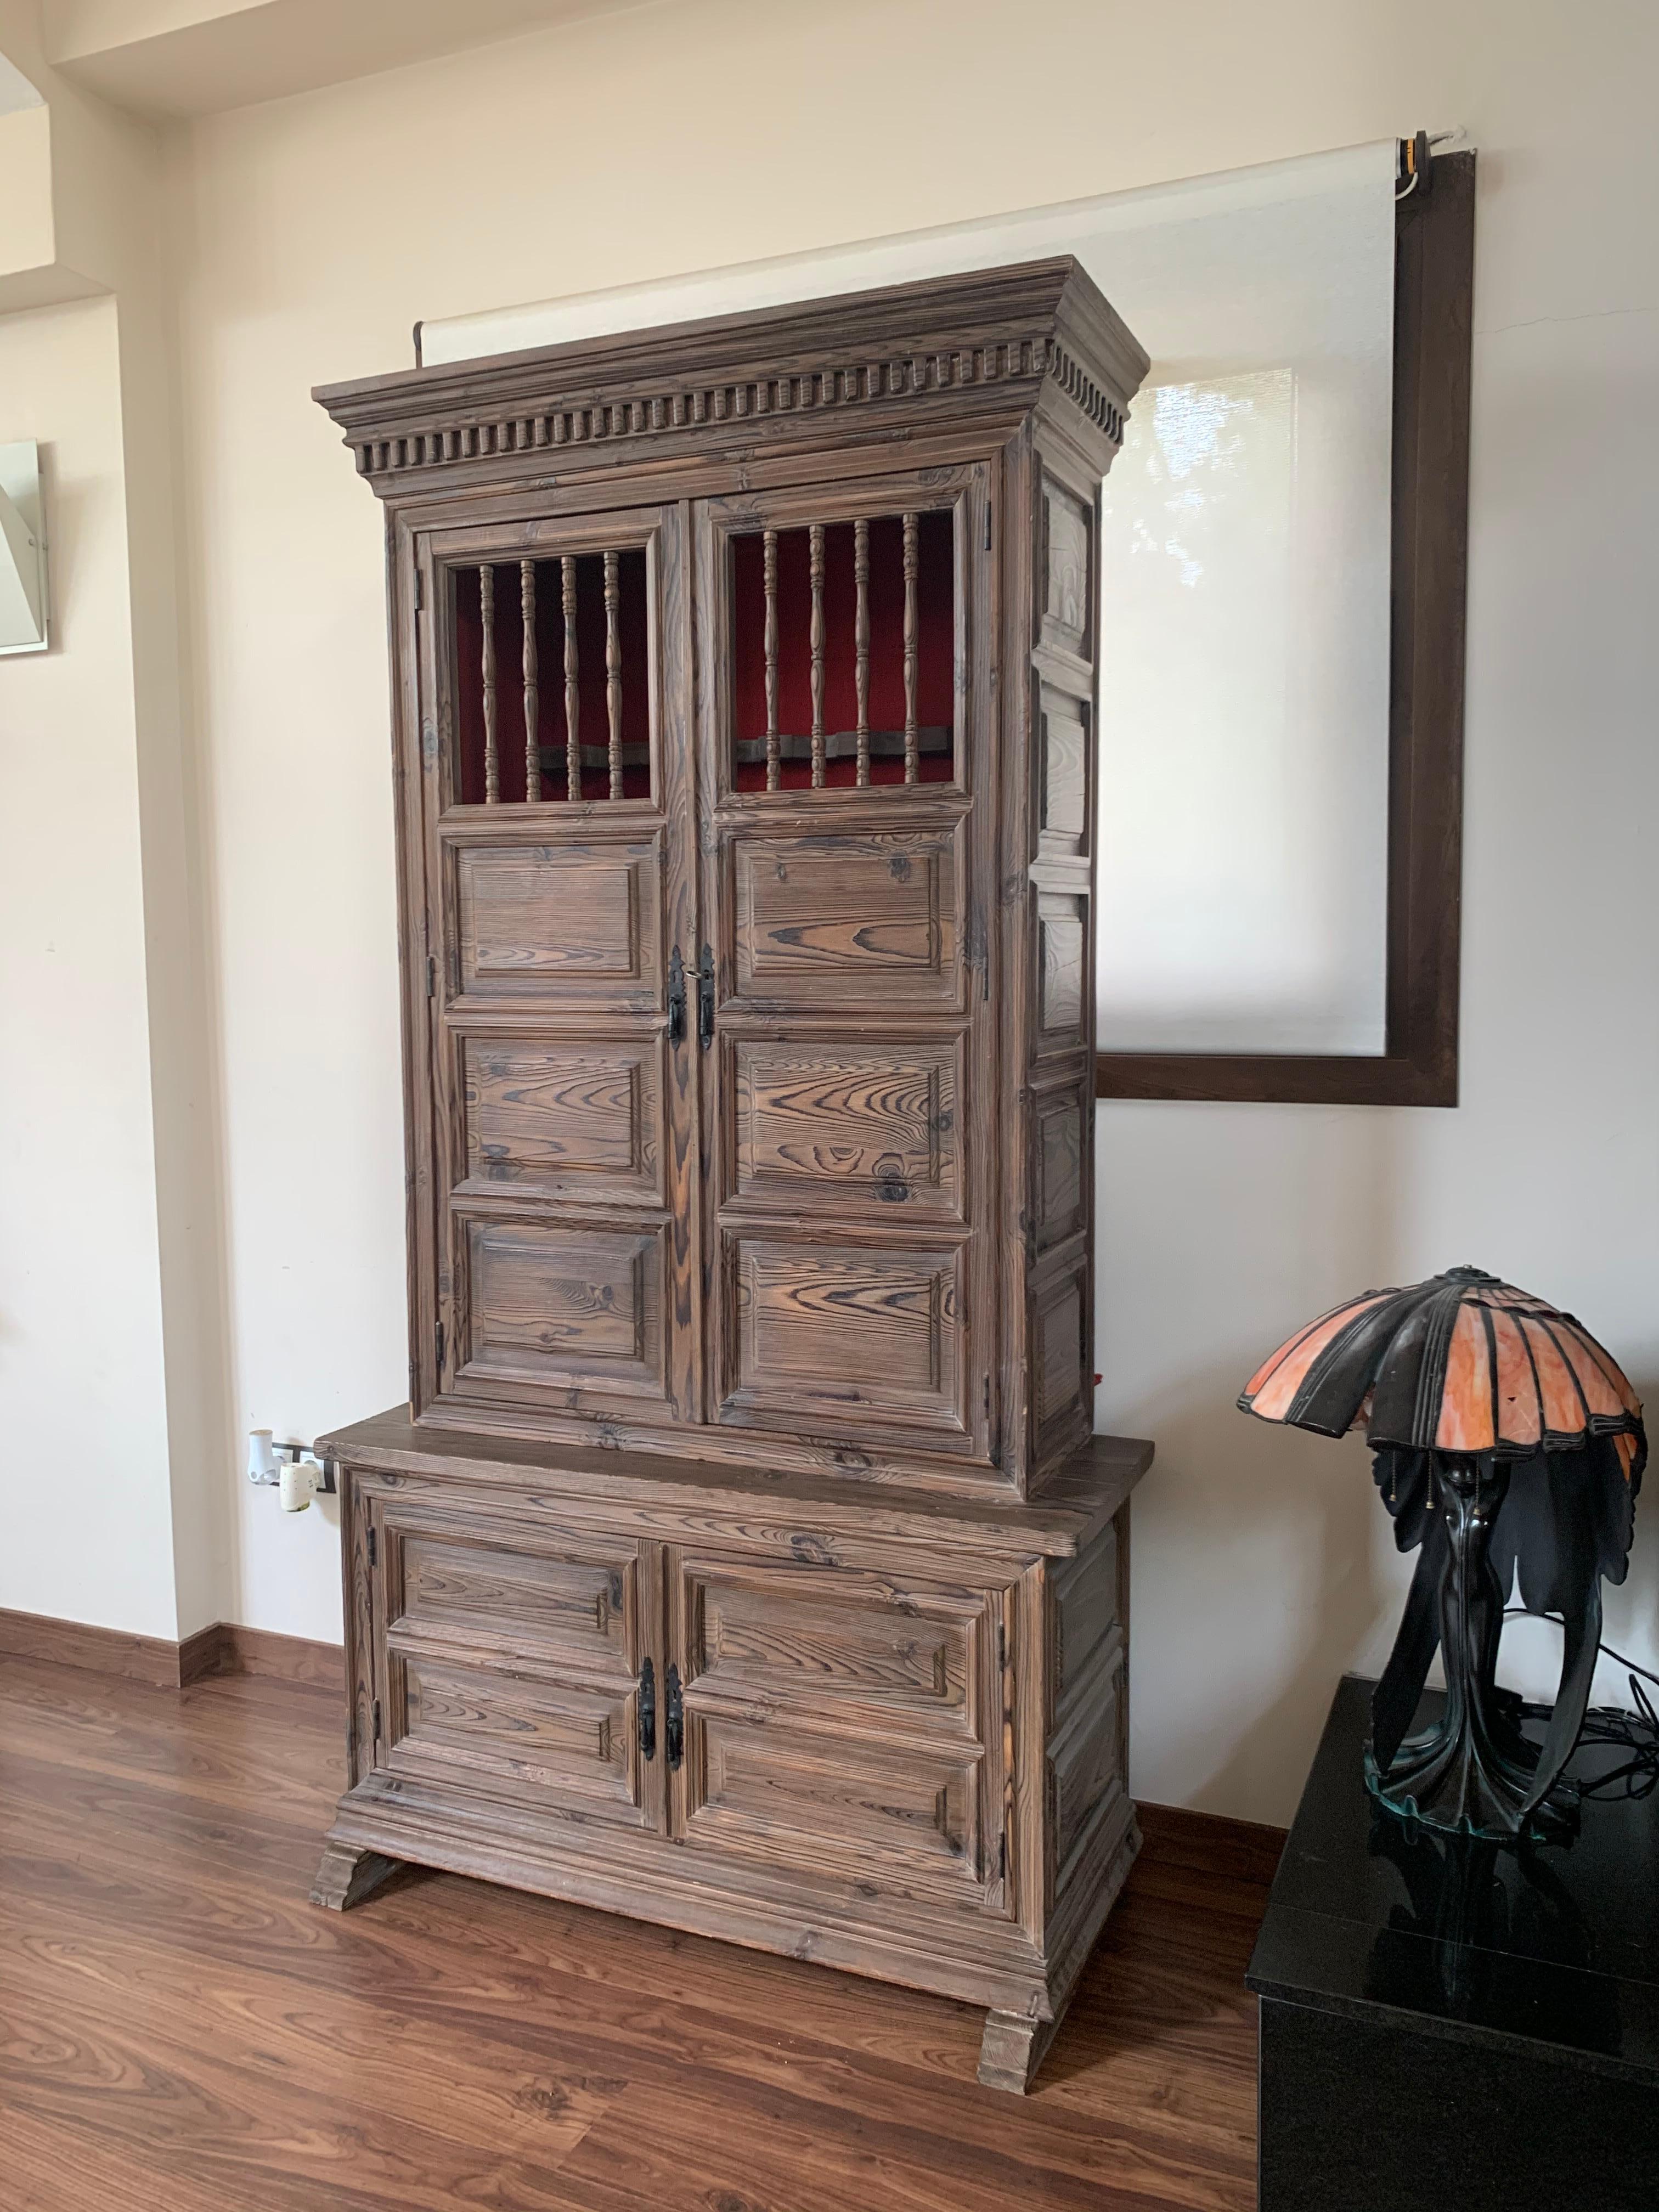 20th century French step back cupboard or linen press with four doors
The wood has a lovely patina

This is a rare period Regence French Buffet a Deux Corps from the Auvergne region of France. It has a deep, rich patina along with deep carvings